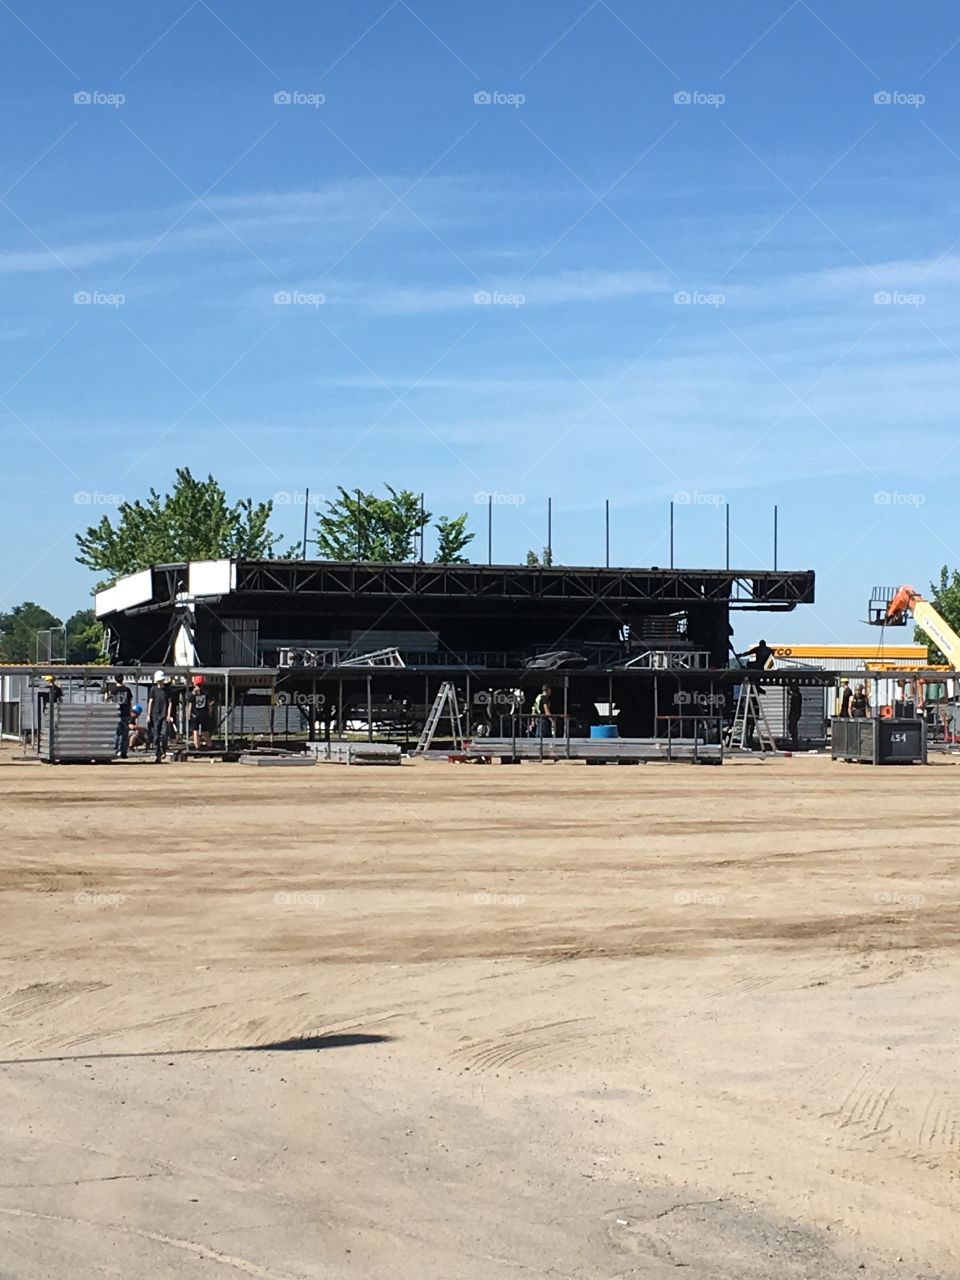 Rock fest montebello Canada we install the tents that are used for the festival 